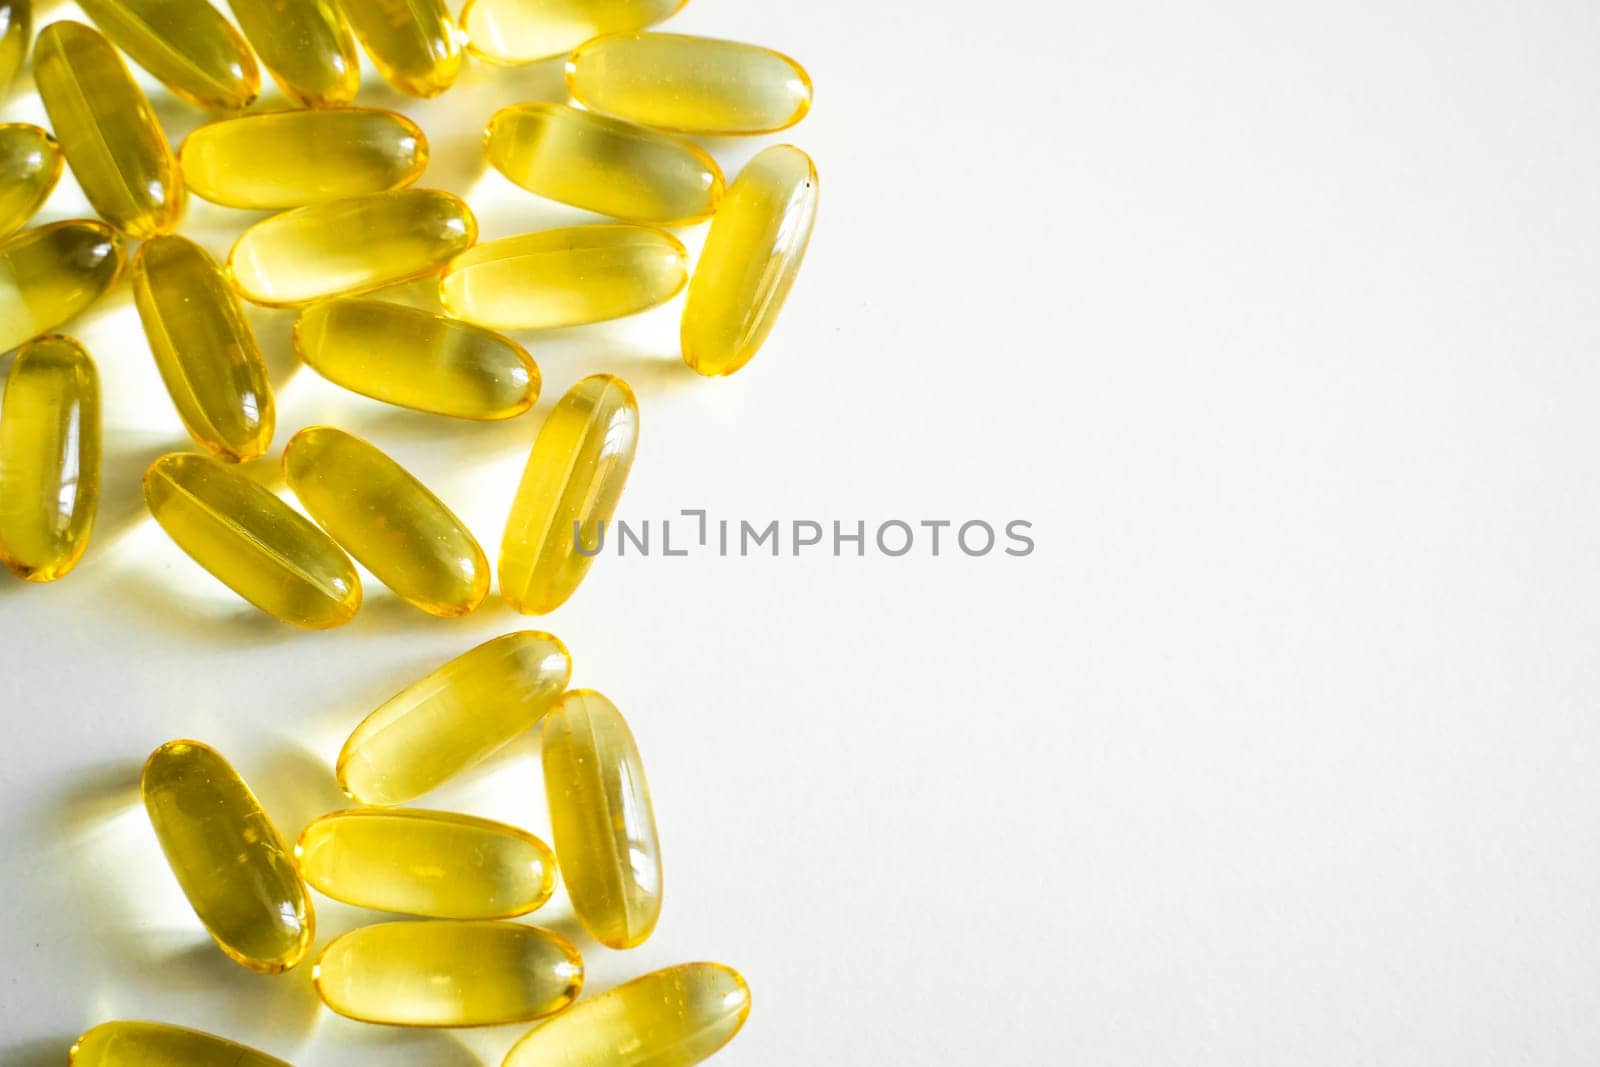 Oil filled capsules, softgel of food supplements. Fish oil, omega 3. Yellow softgels on white, copy space